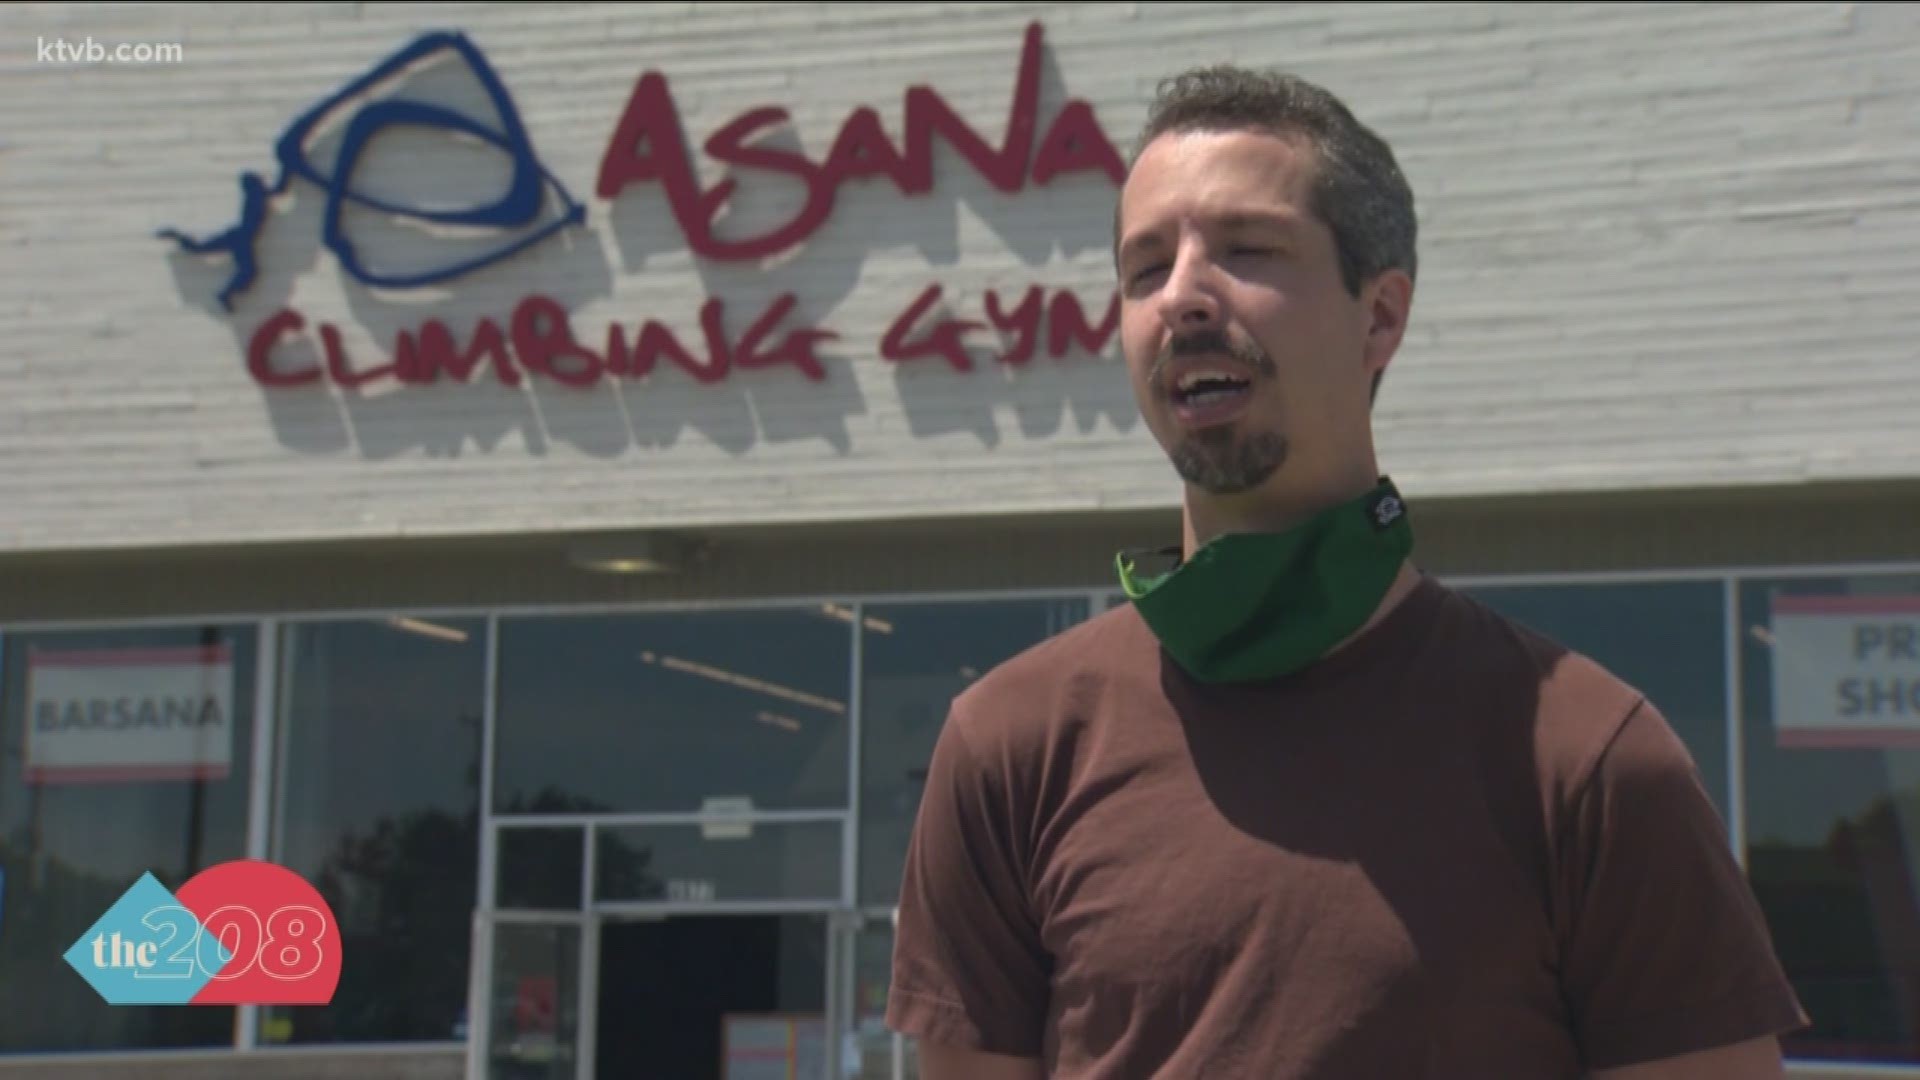 Asana, a climbing gym, got a lot of feedback from its customers about a policy demanding that they wear a mask.